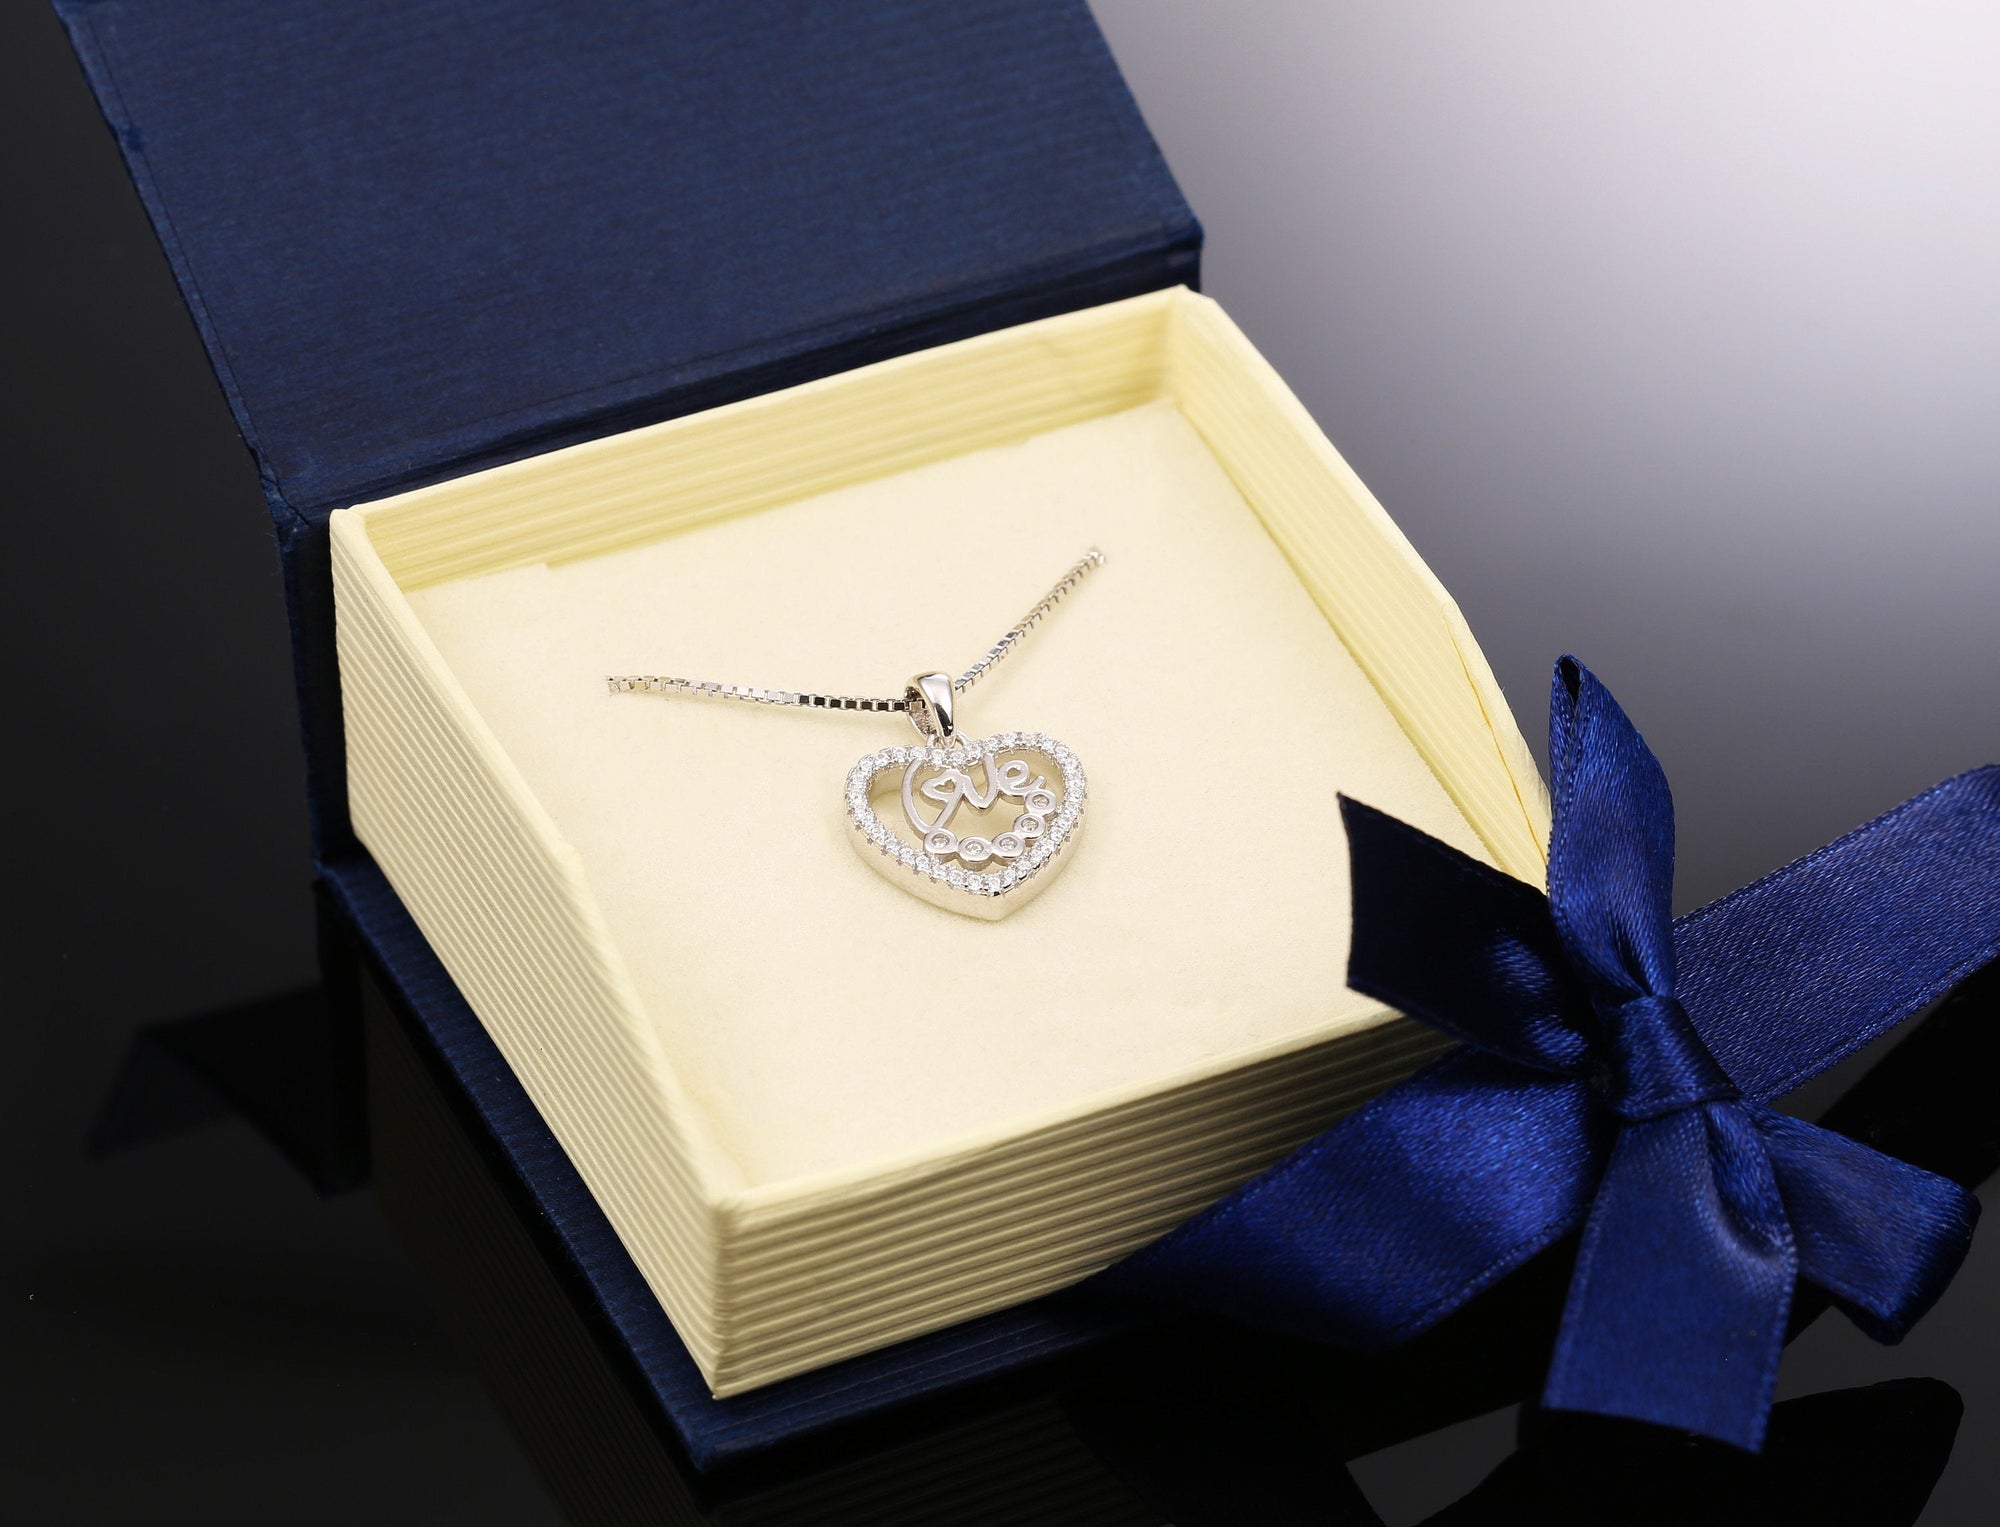 CZ Heart and Love Charm Necklace in Sterling Silver